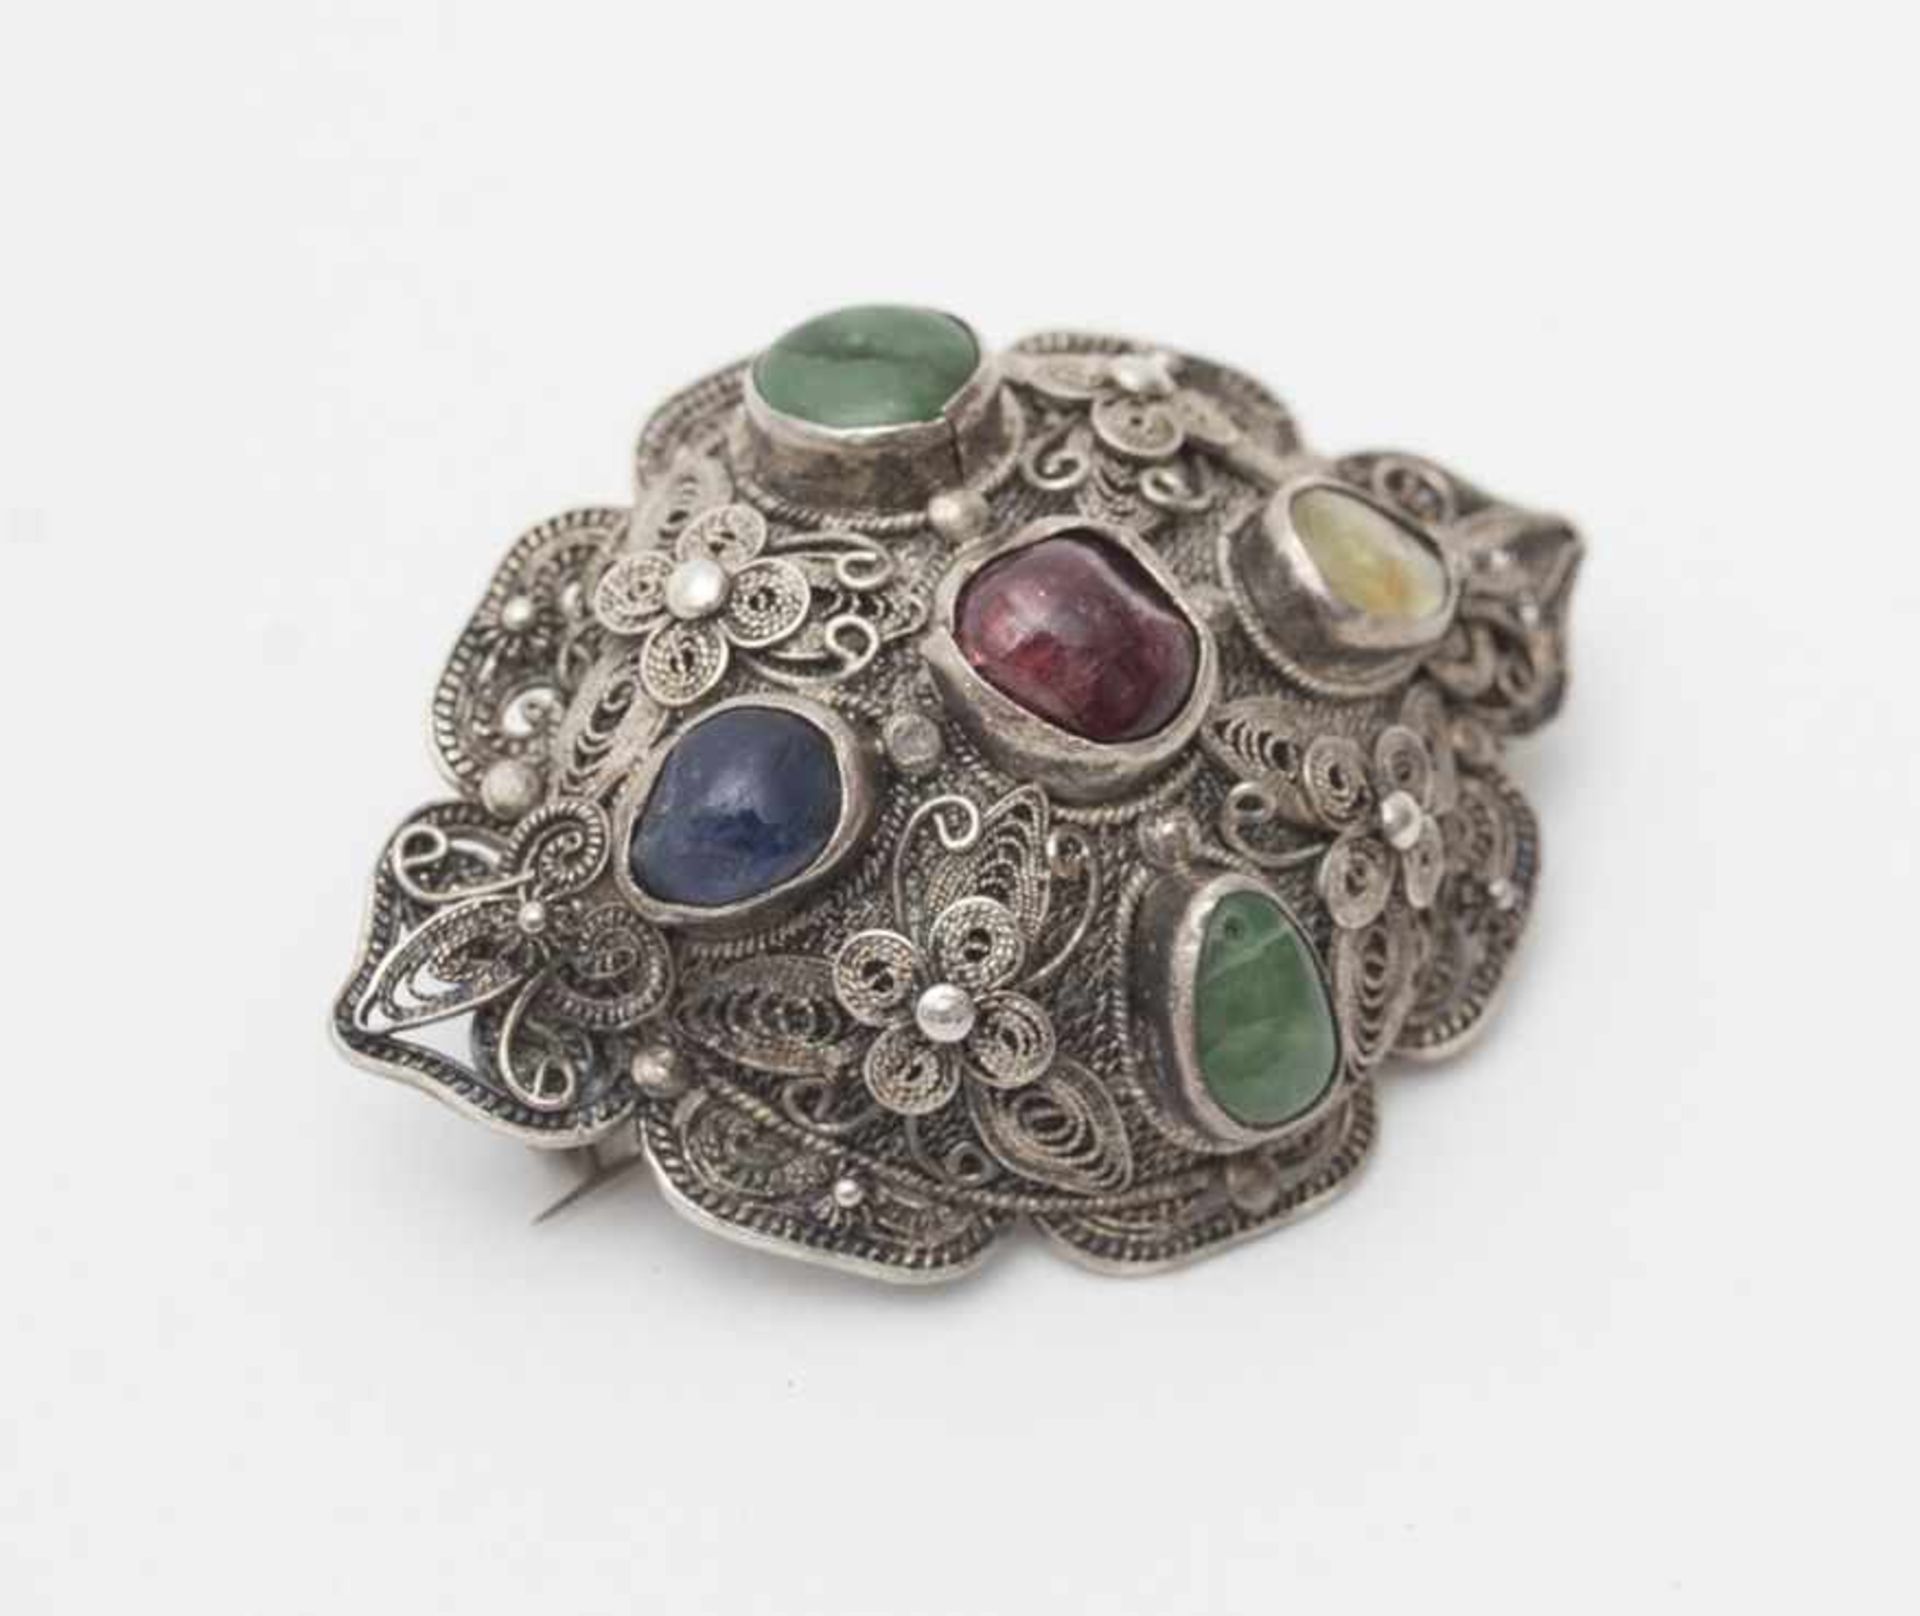 Brooch - China, 20th century Silver filigree with floral pattern, set with 5 cabochons, probably